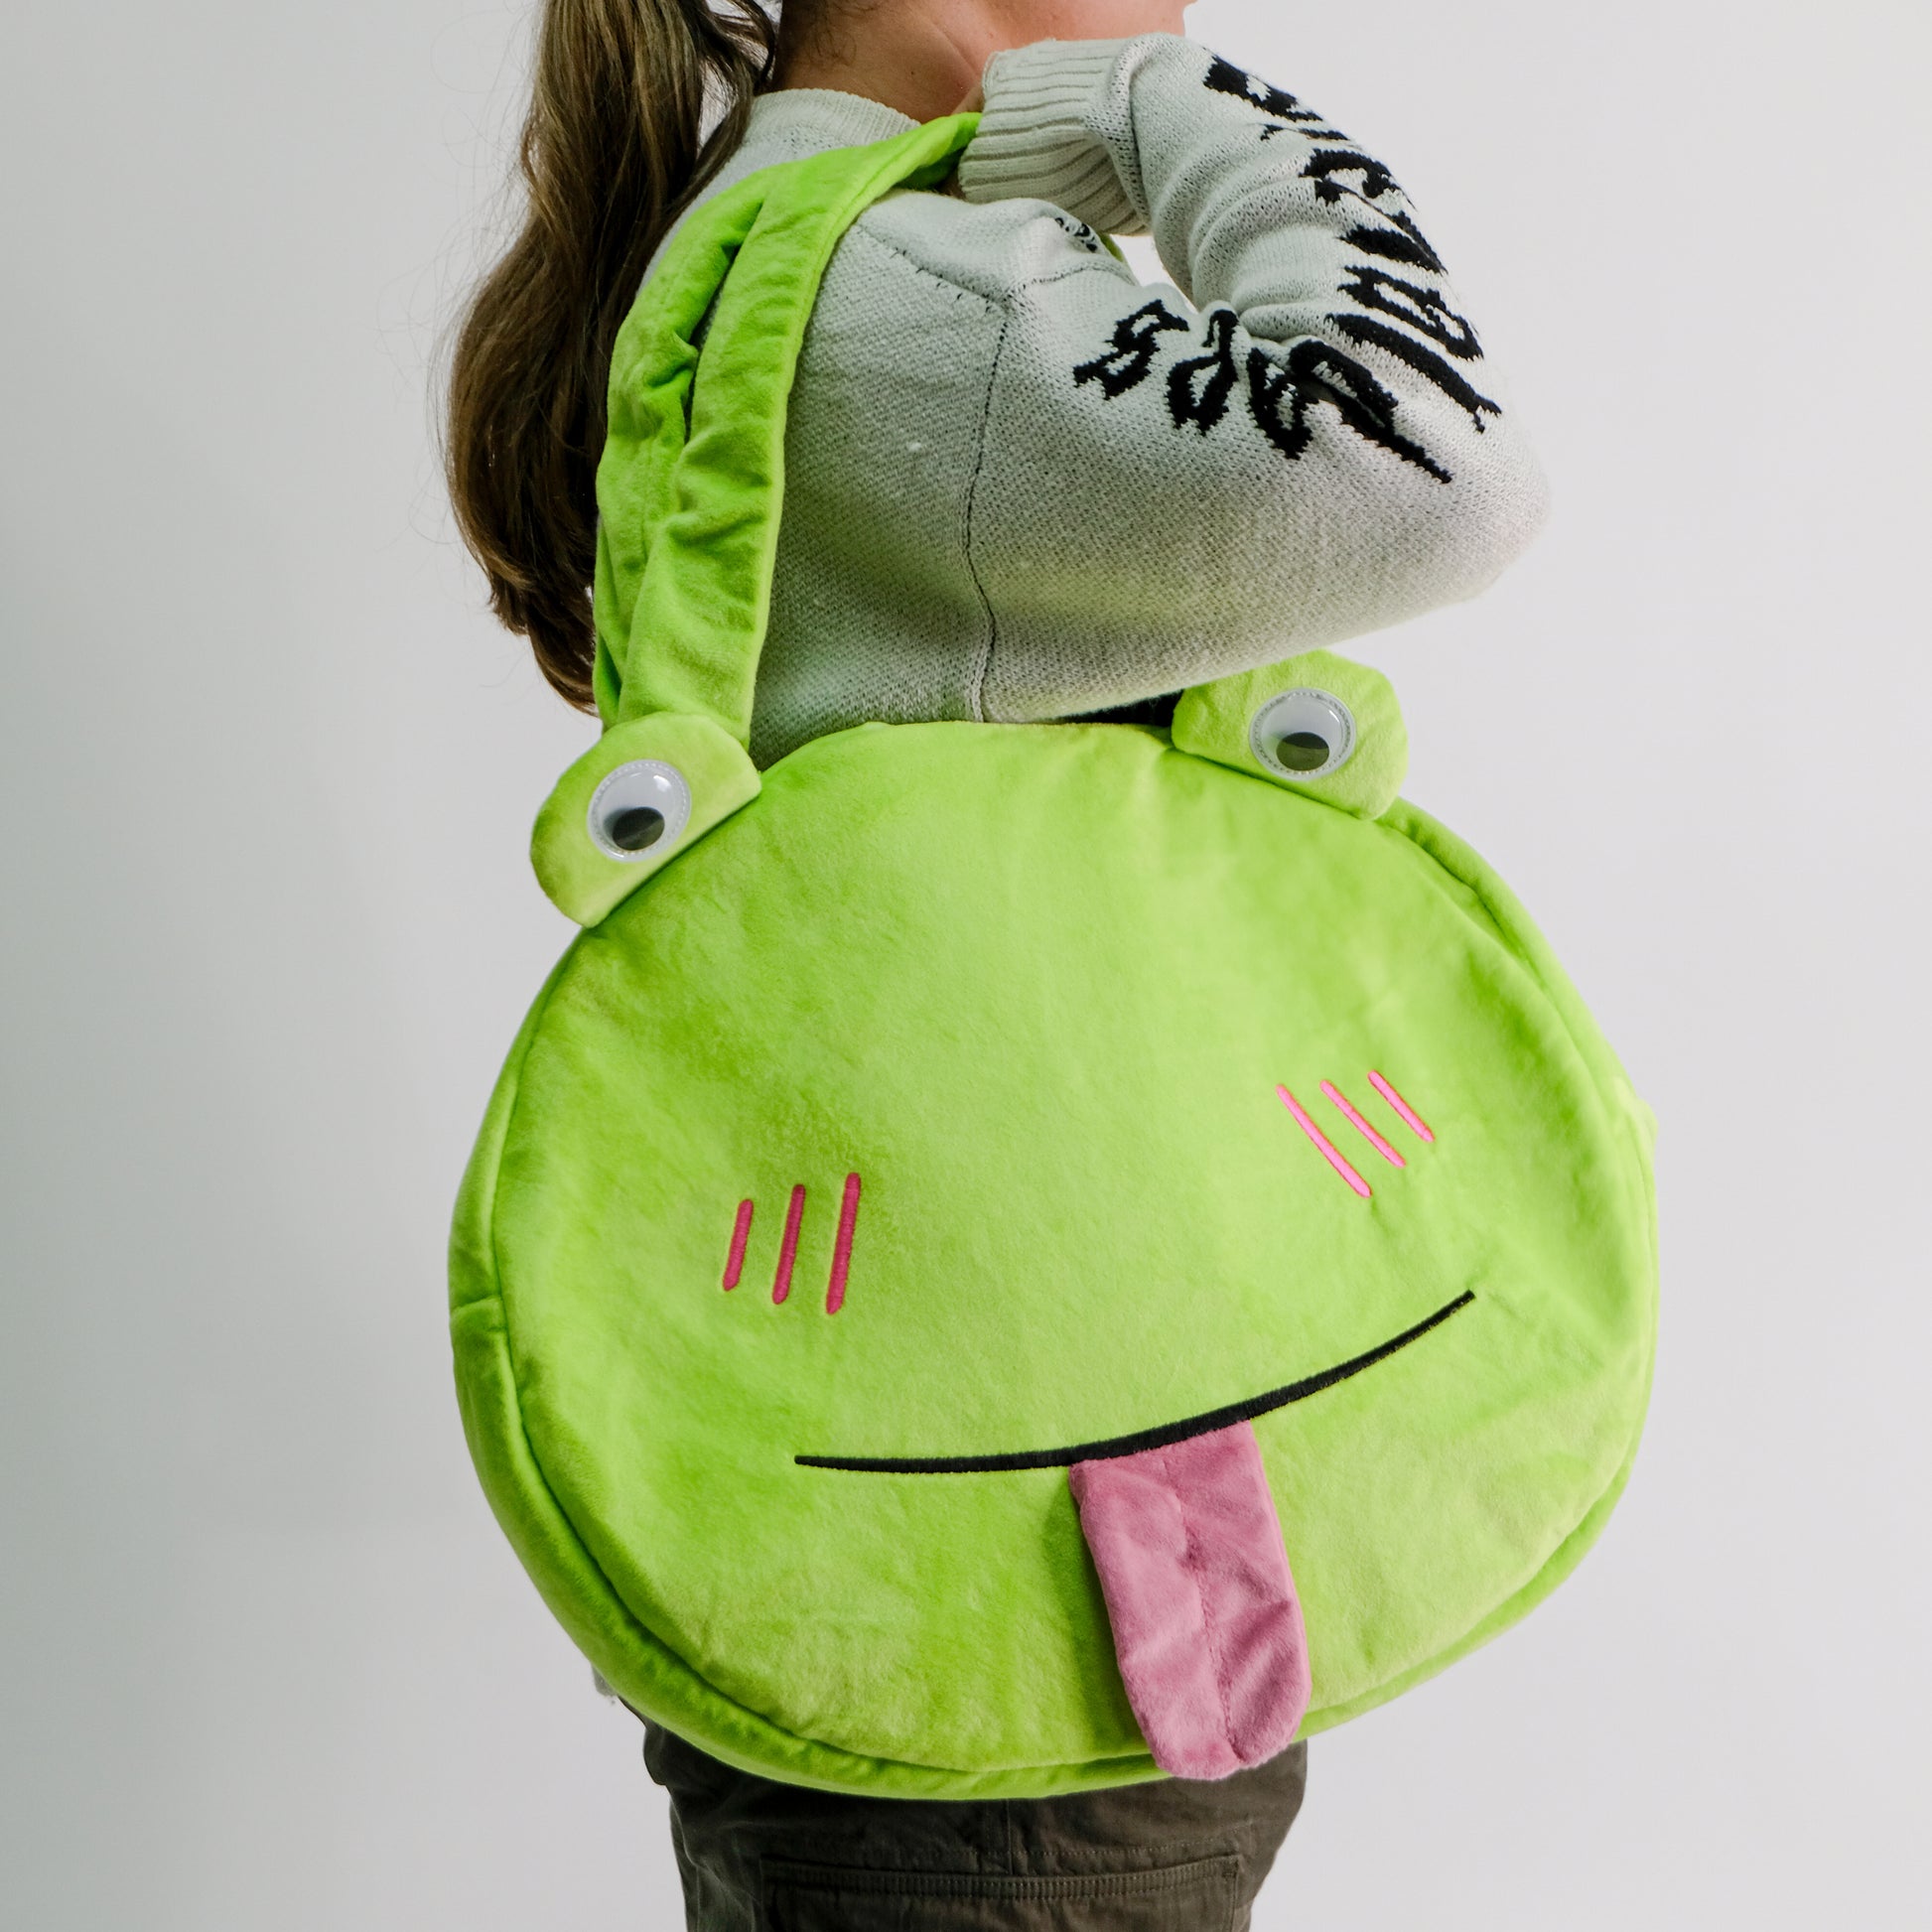 Bevvy the Frog Bag - Accessories - KOI Footwear - Green - Model Side View